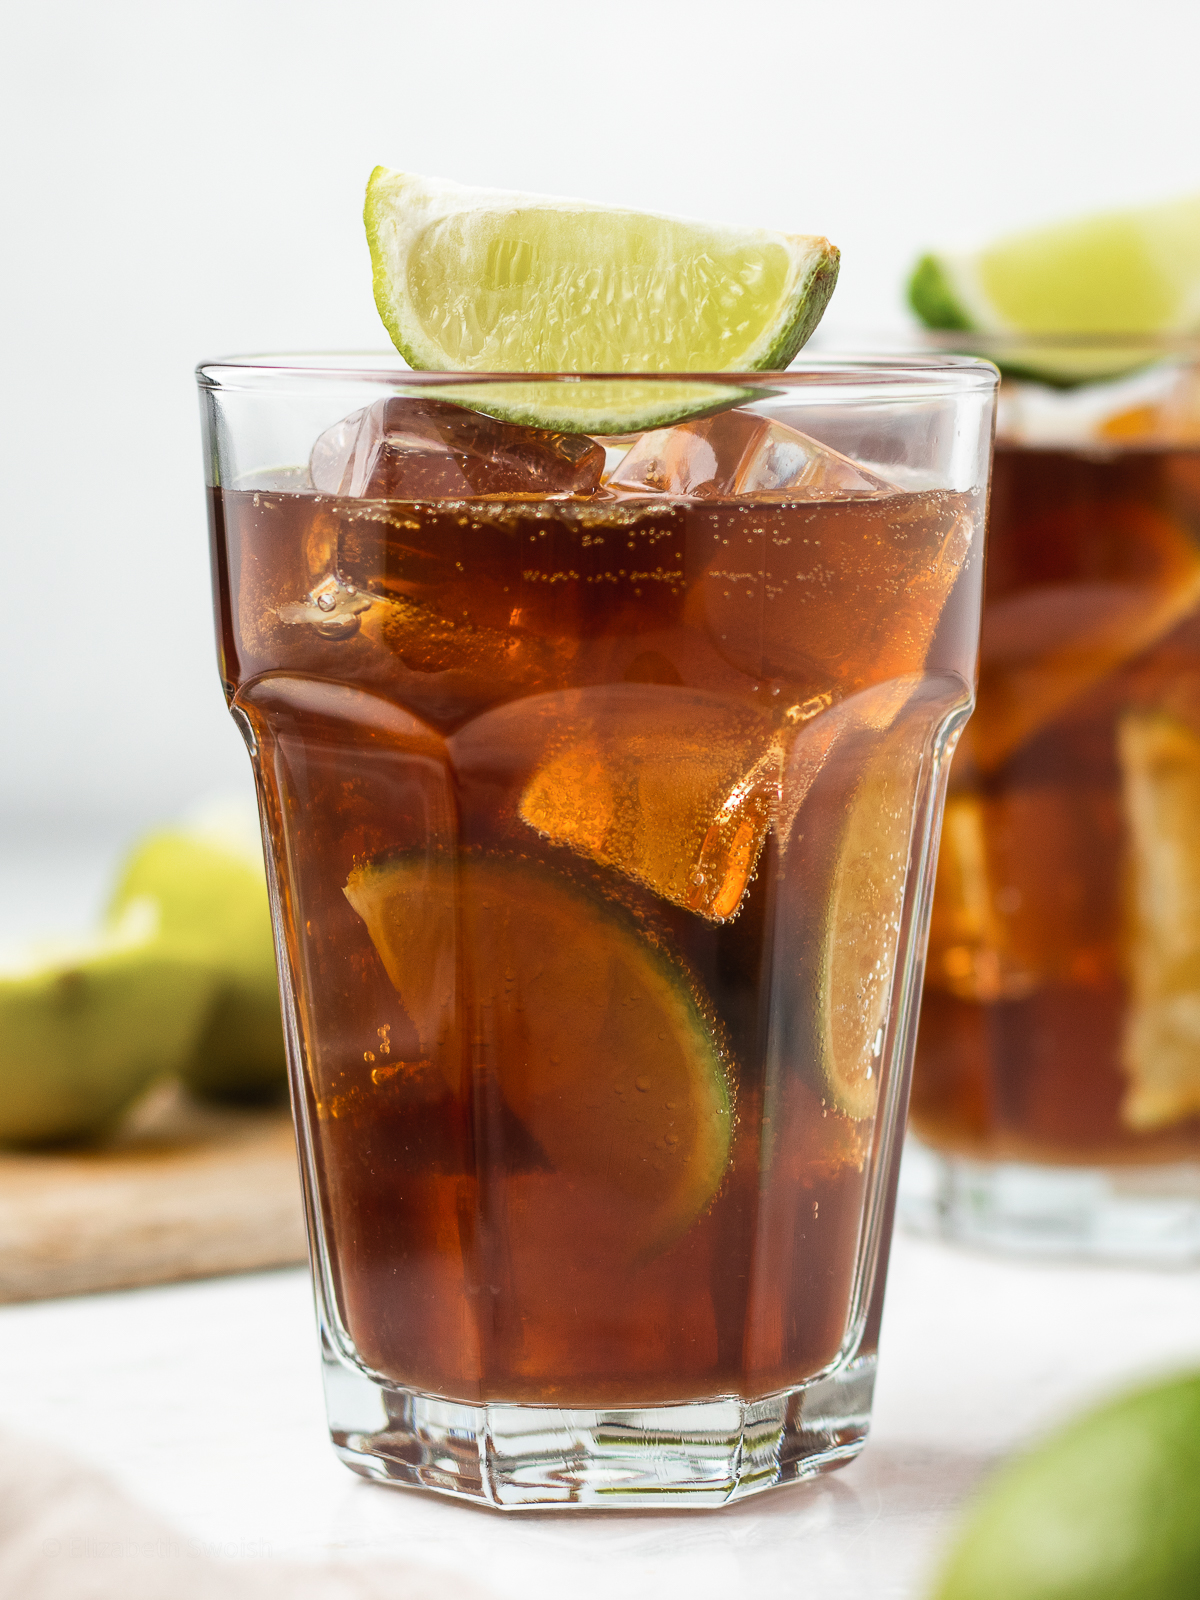 Two non alcoholic Cuba Libre drinks with a lime wedge garnish on top and more on the side.